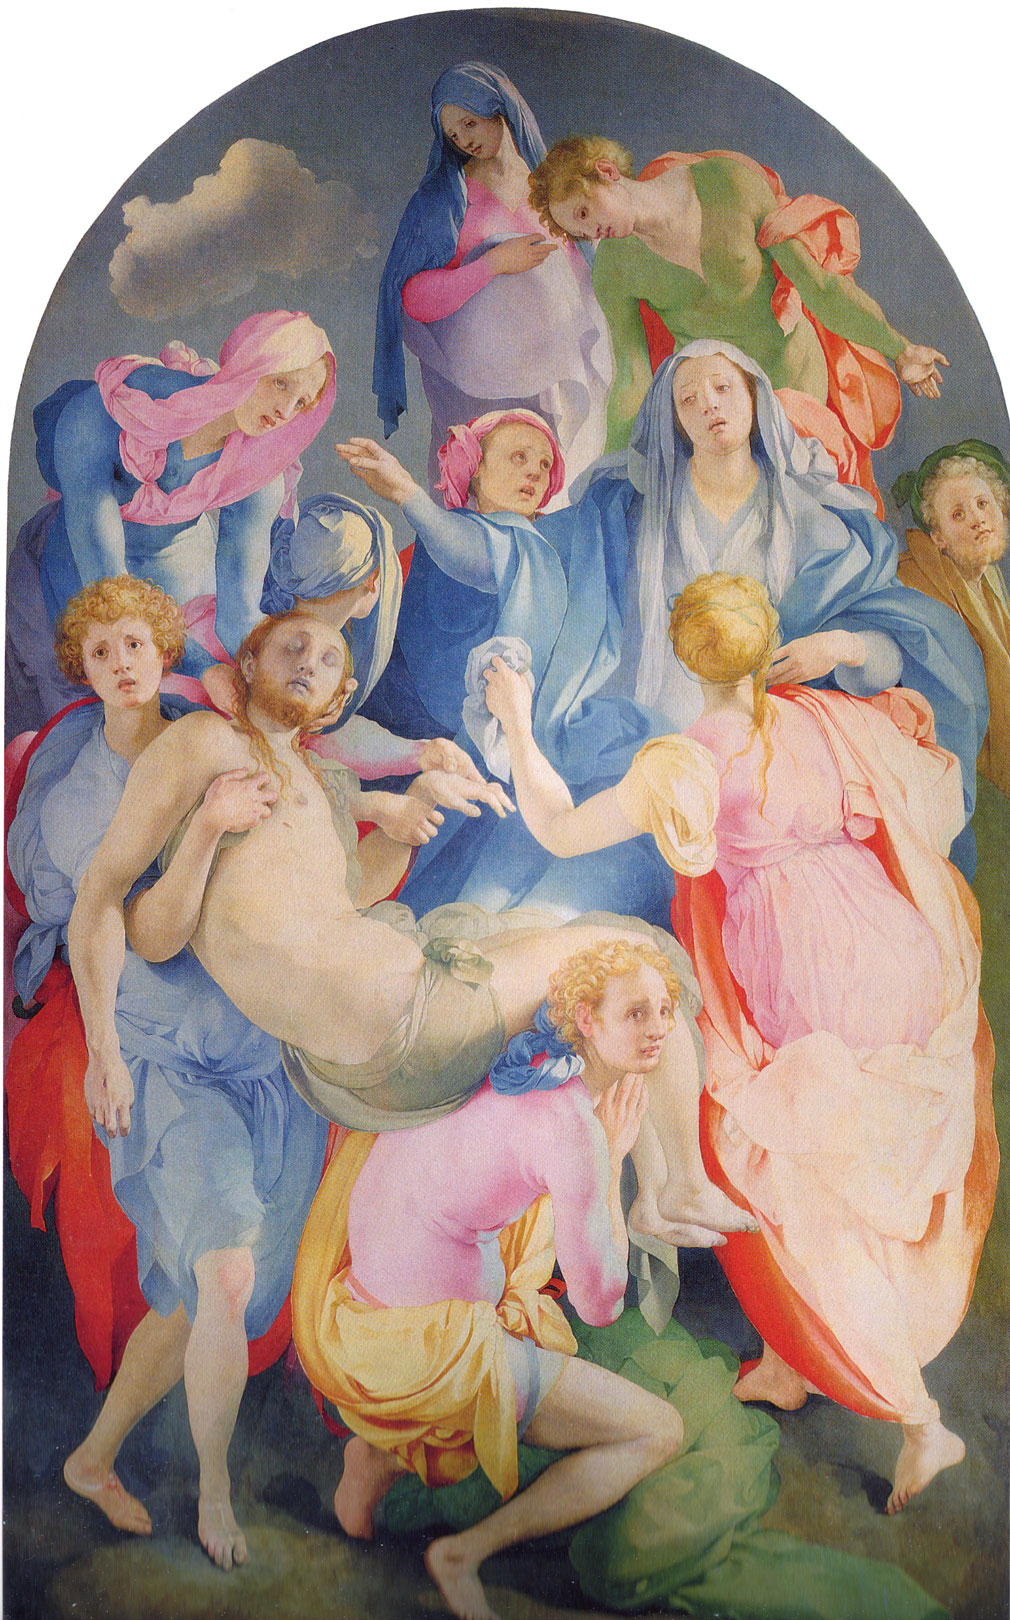 Pietà (The Deposition from the Cross) by (1525-28) Jacopo del Pontormo, as reproduced in Art in Time